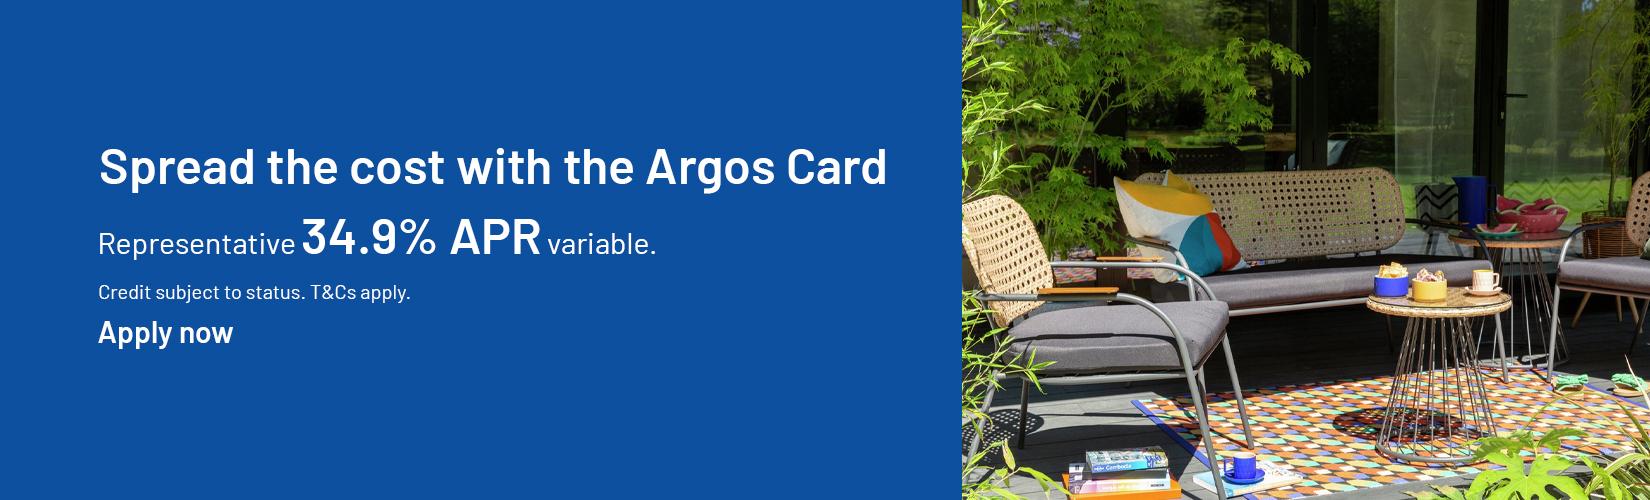 Spread the cost with the Argos Card. Representative 34.9% APR variable. Credit subject to status. T&Cs apply.